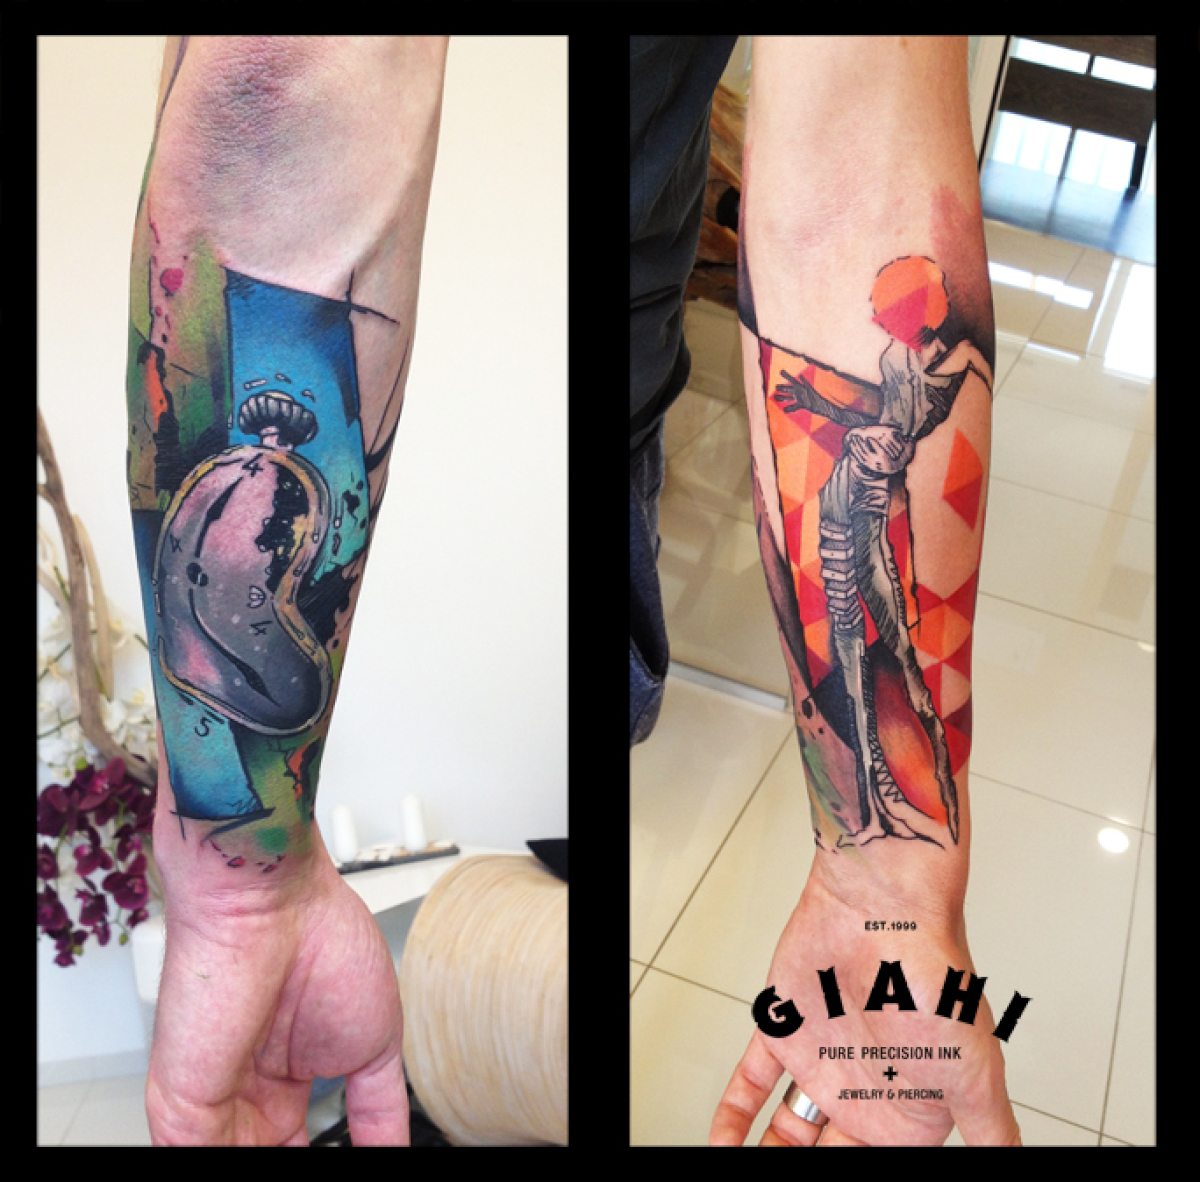 Salvador Dali Girl and Melting Clock tattoo by Live Two